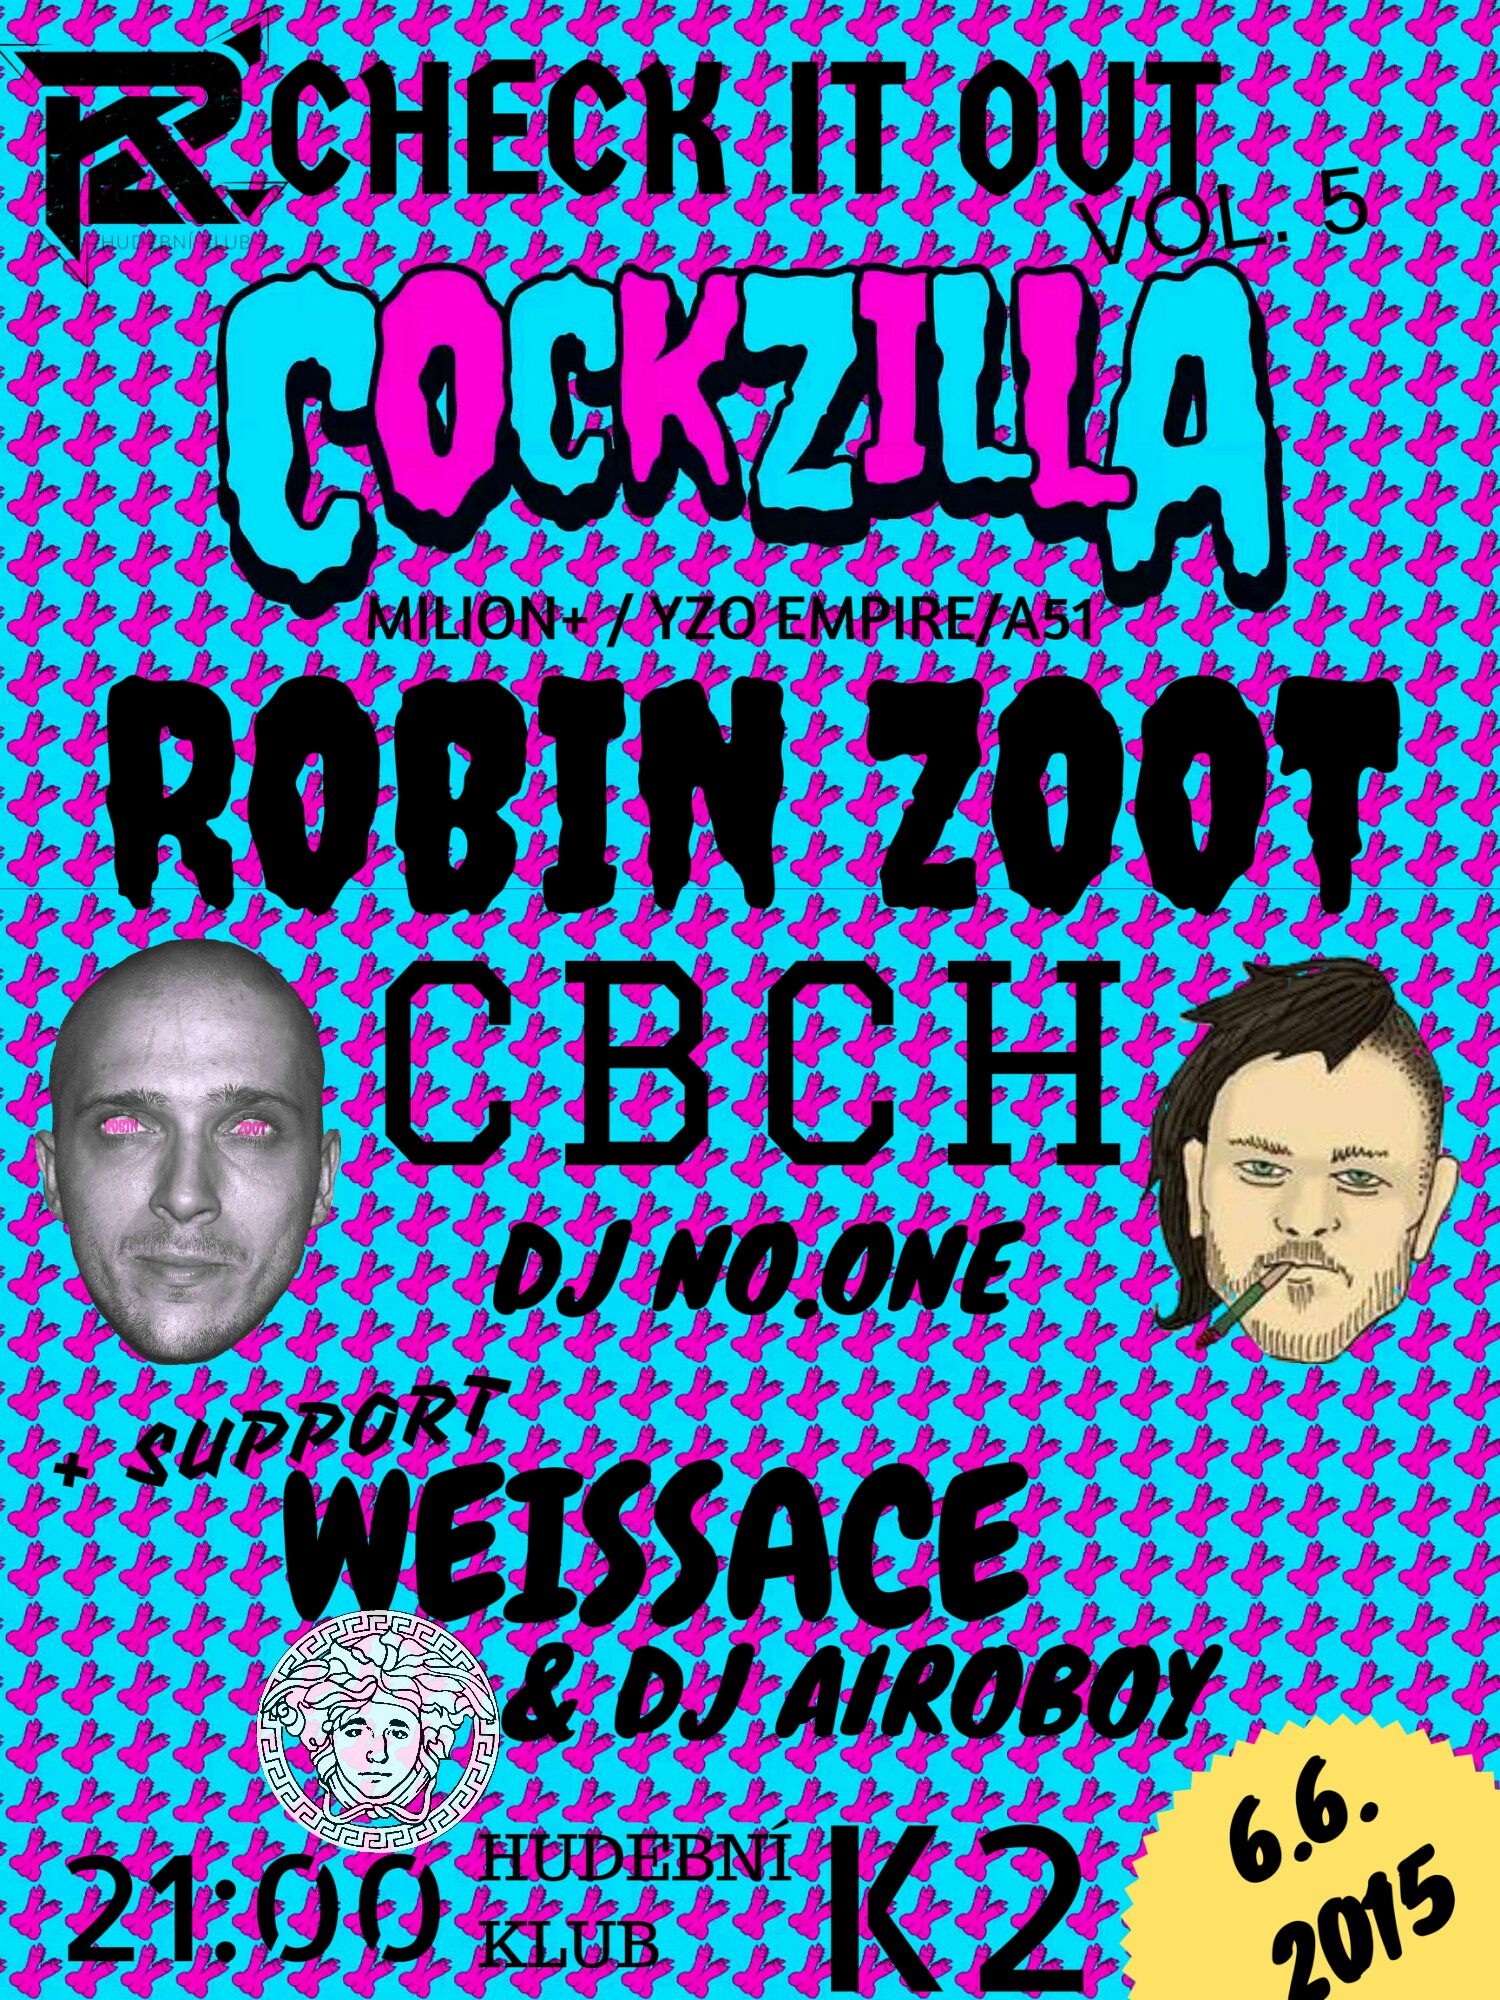 CHECK IT OUT V. - ROBIN ZOOT, CBCH, DJ NO.ONE + WEISSACE & AIROBOY